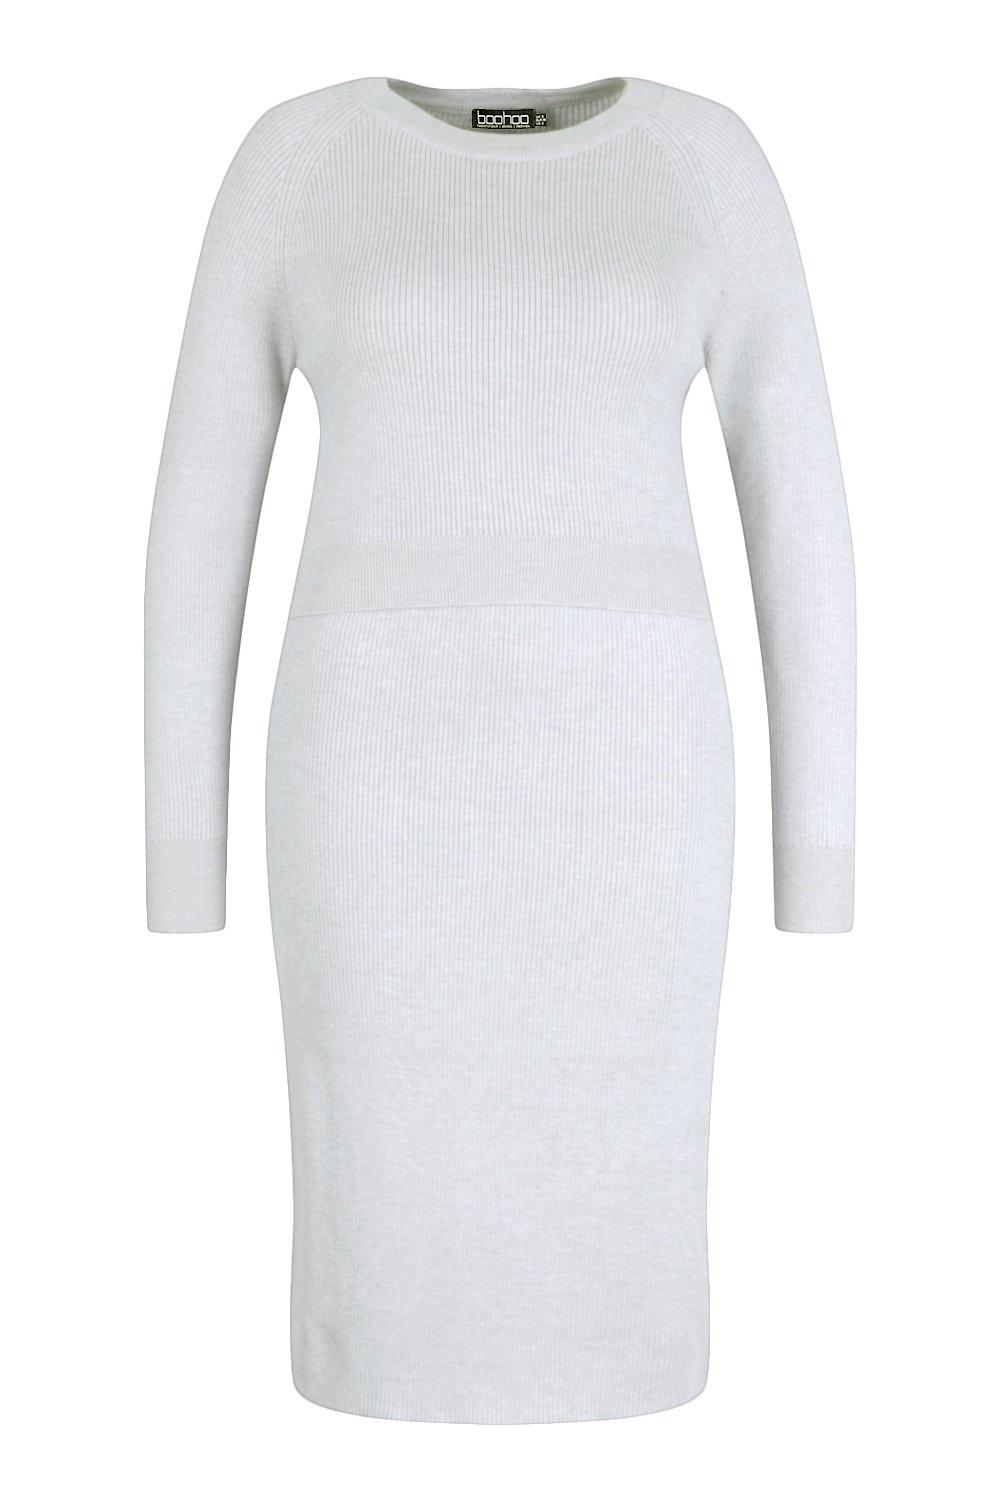 Boohoo Plus Fluffy Knitted Sweater & Skirt Set in Cream - Save 13% Womens Clothing Suits Skirt suits White 